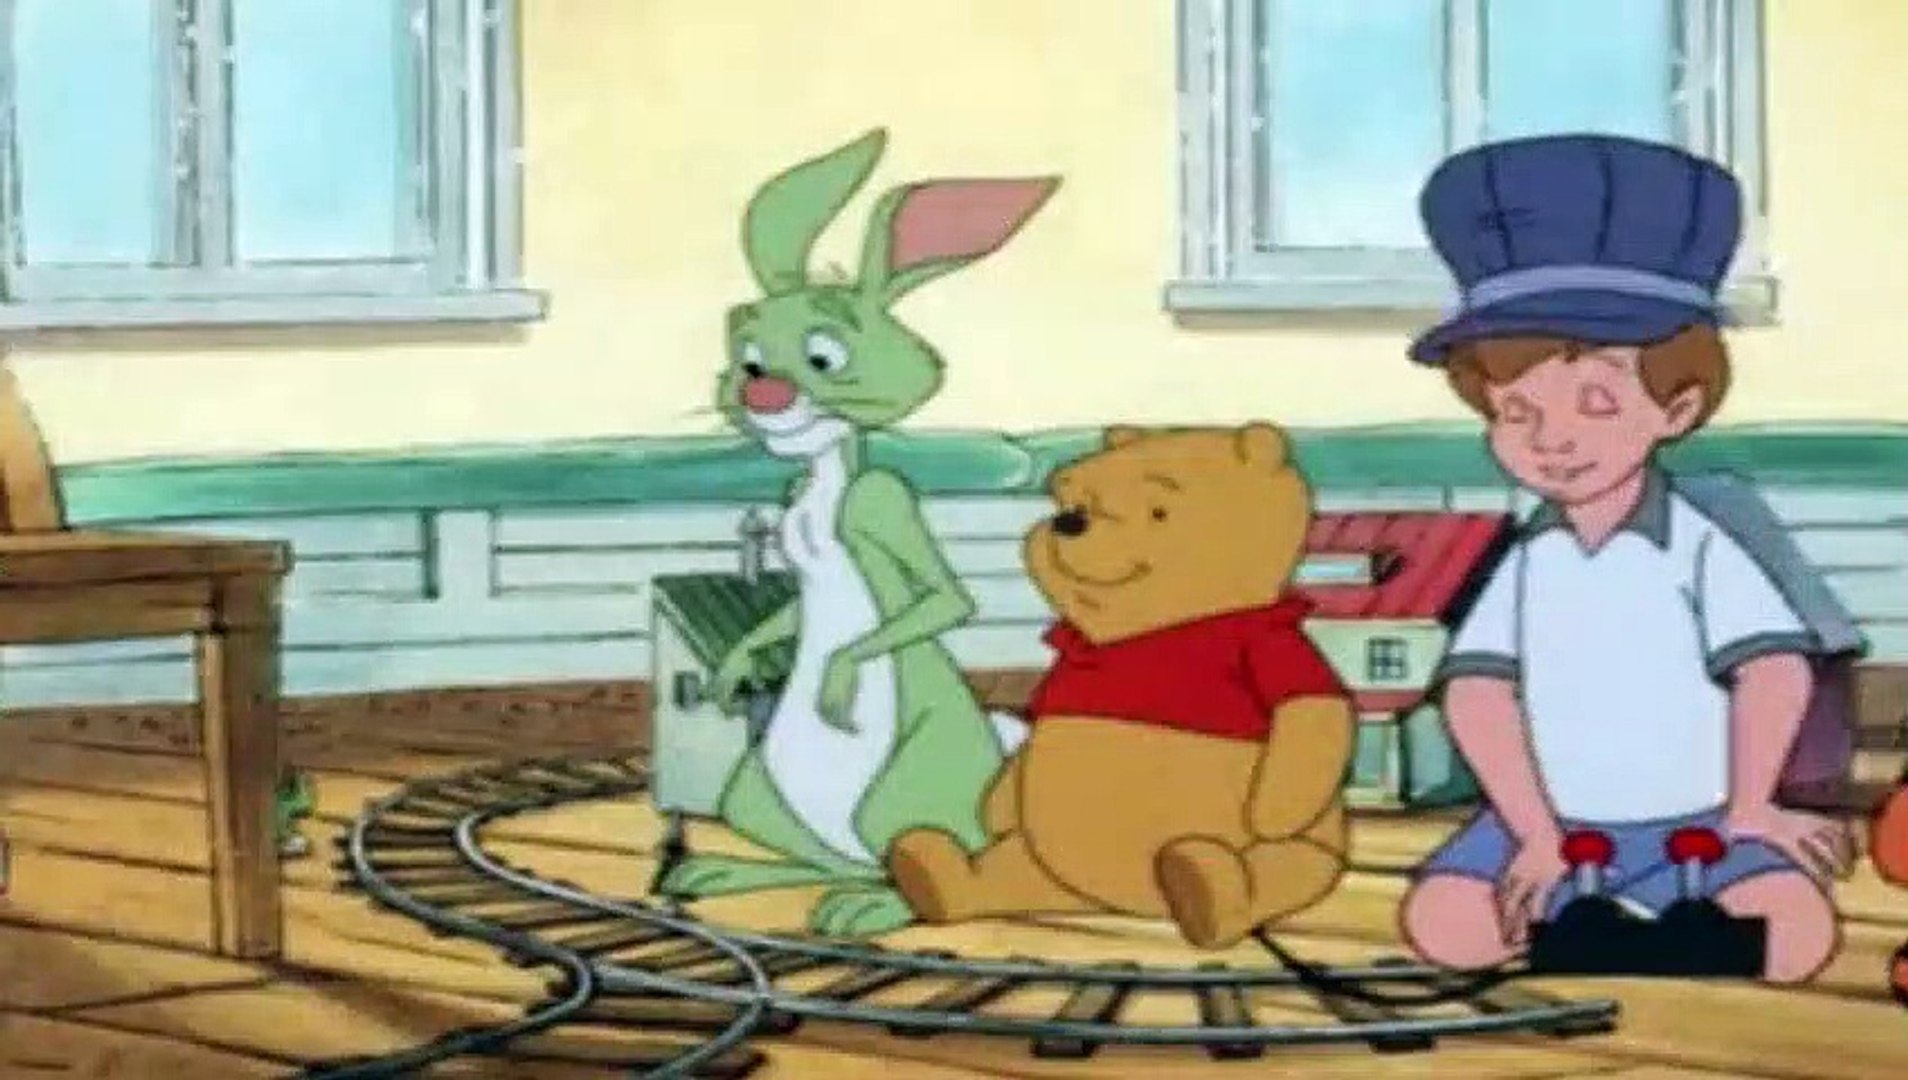 Winnie the Pooh S04E04 The Good, the Bad, and the Tigger - video Dailymotion